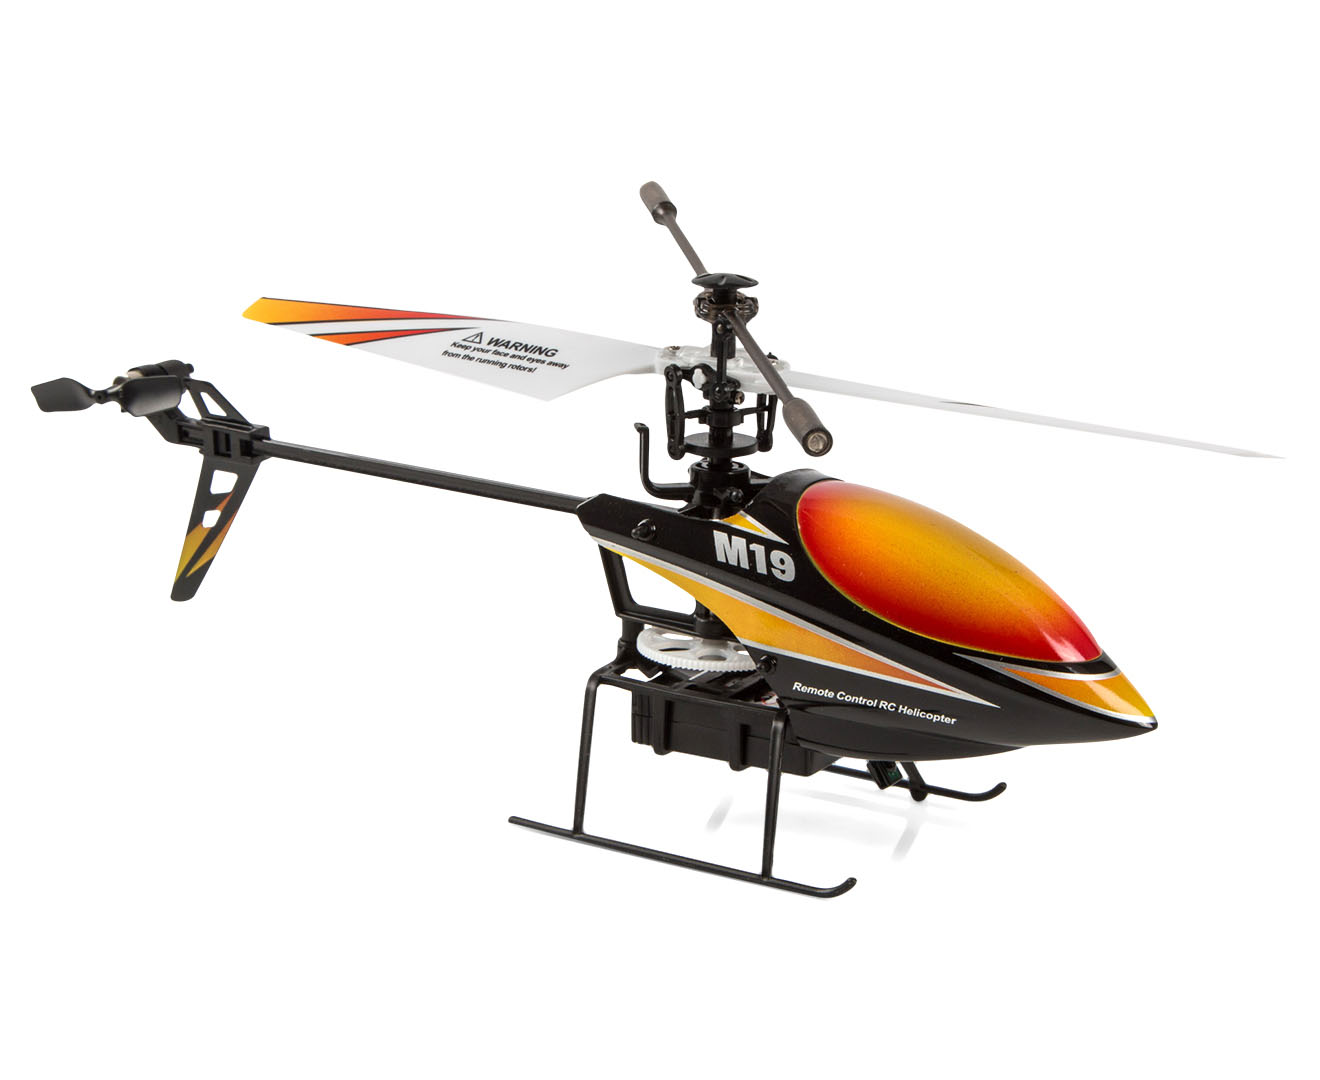 Skytech M19 Remote Control Helicopter - Black/Yellow